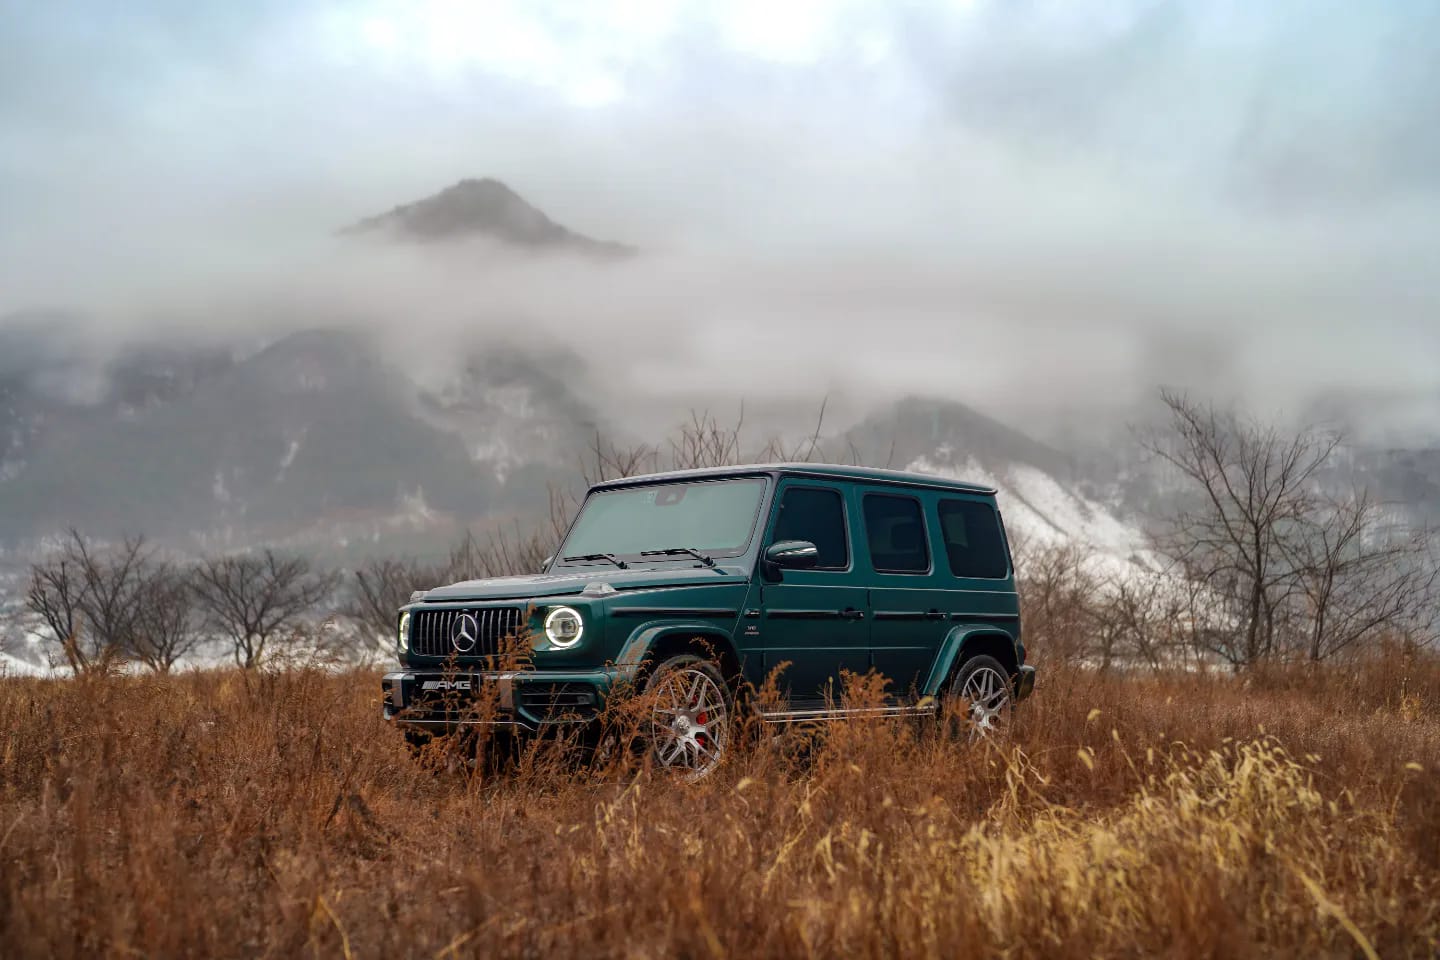 Han Sung Motor shows there’s no road that the Mercedes-AMG G 63 can’t travel on.